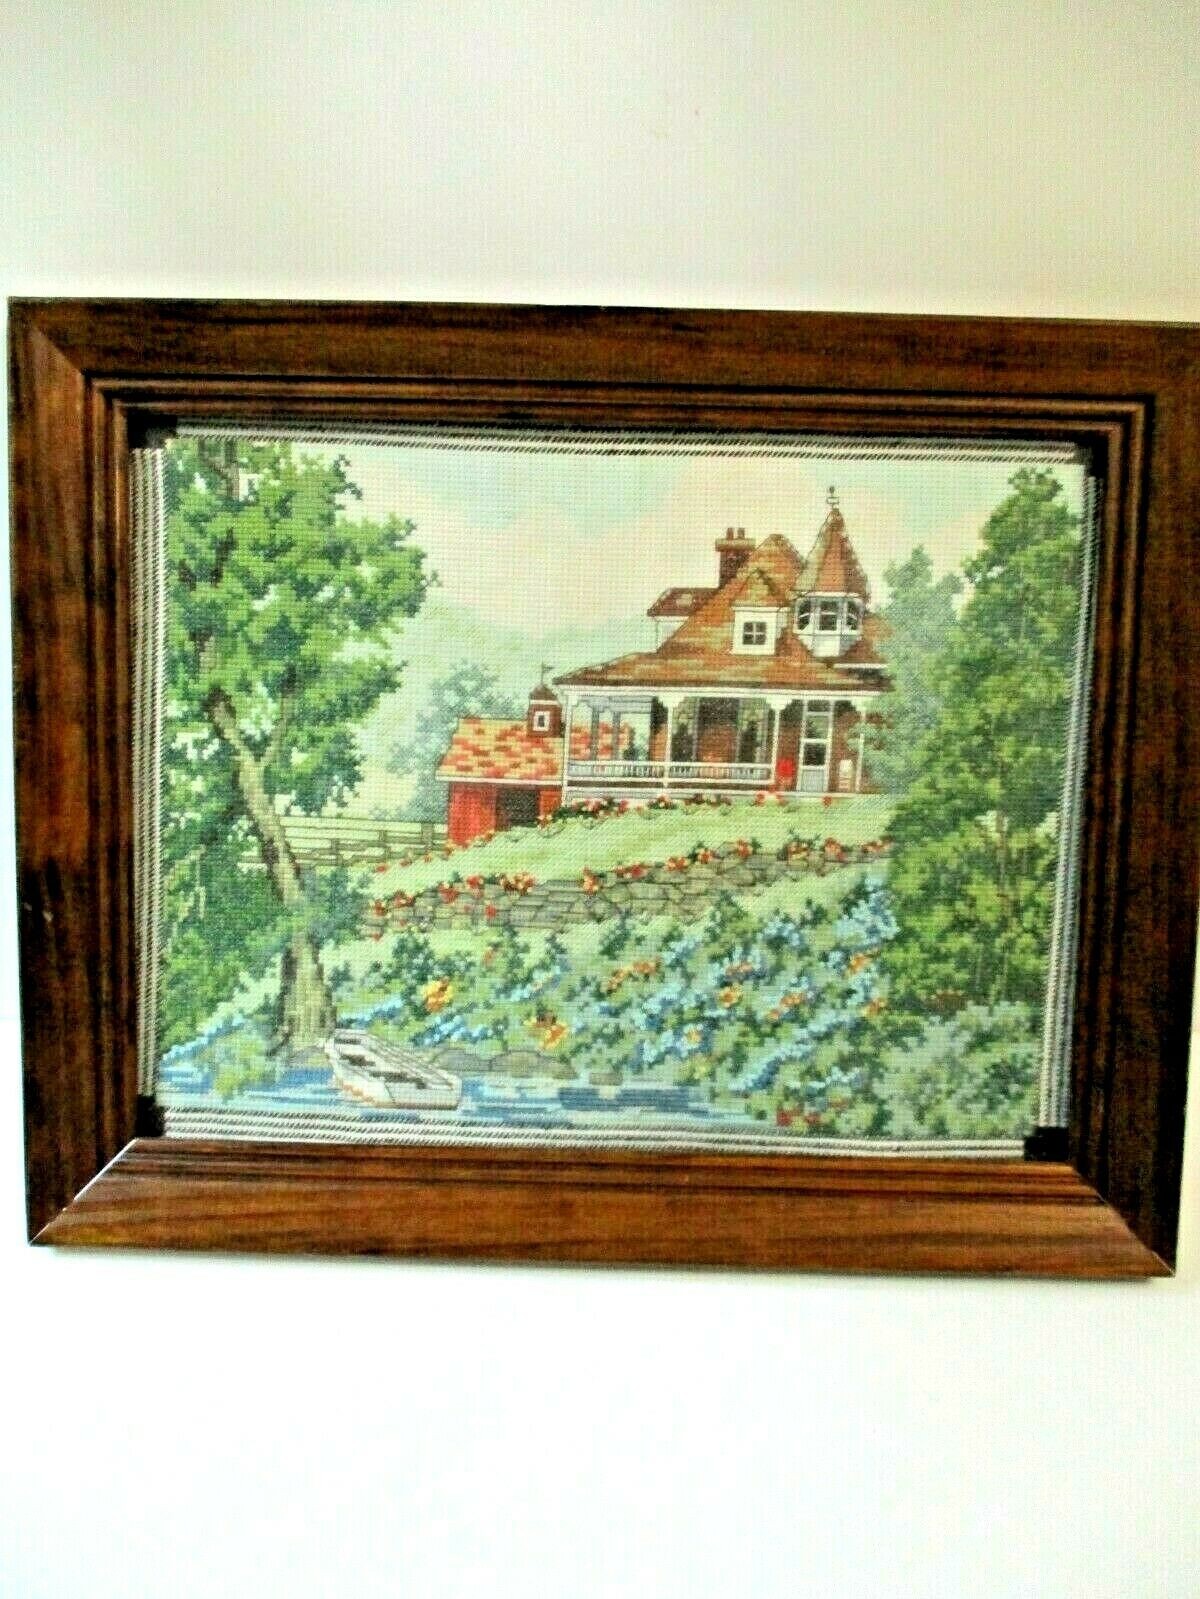 Completed Finished Framed Counted Cross Stitch Farm Water Home Victorian